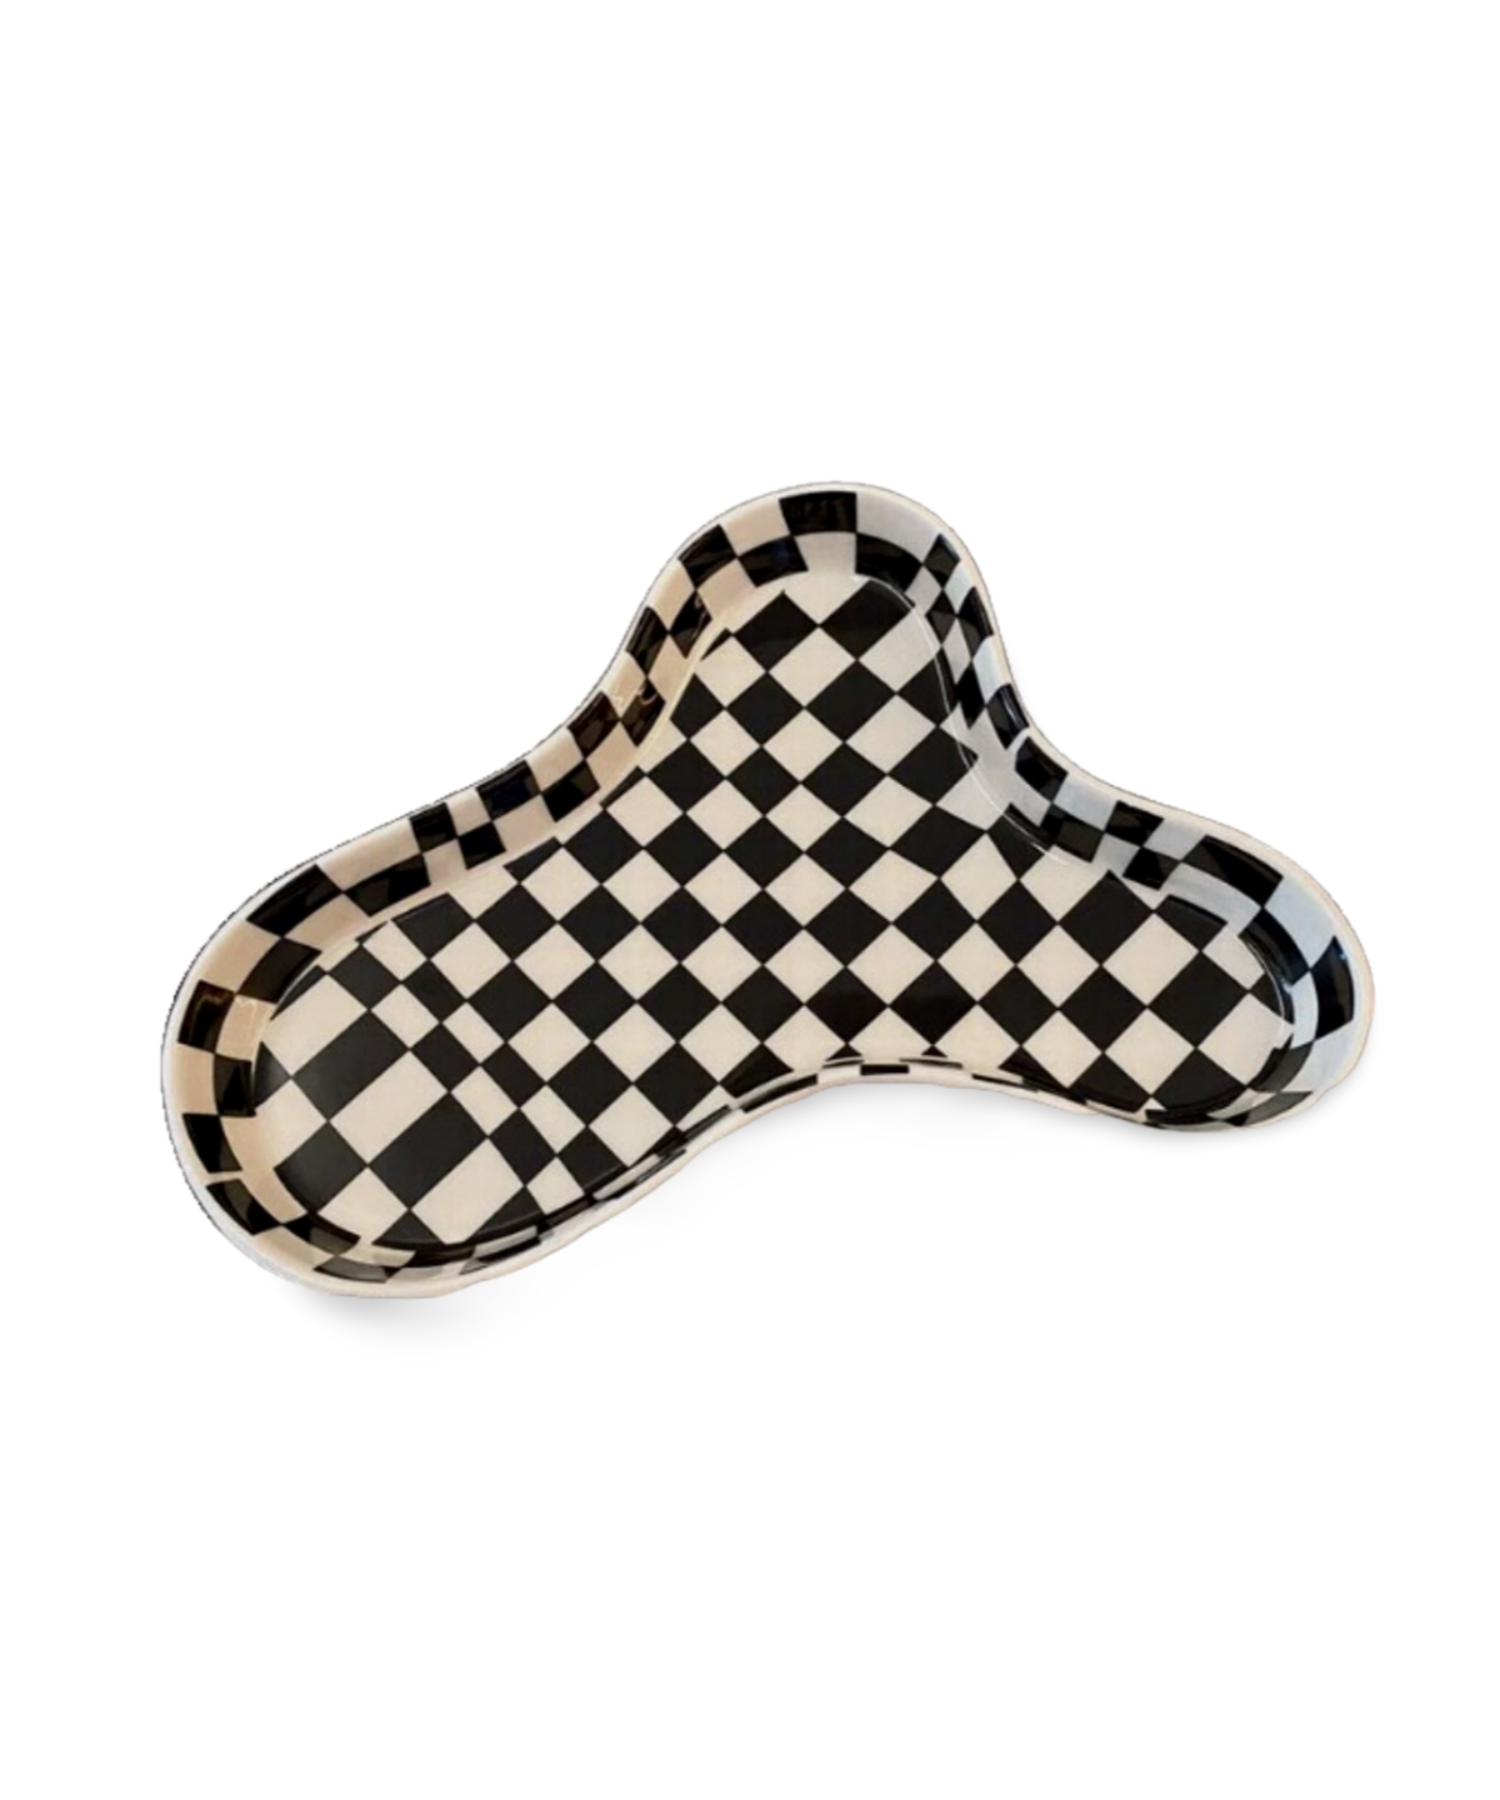 A asymmetrical, black and white checkerboard patterned tray